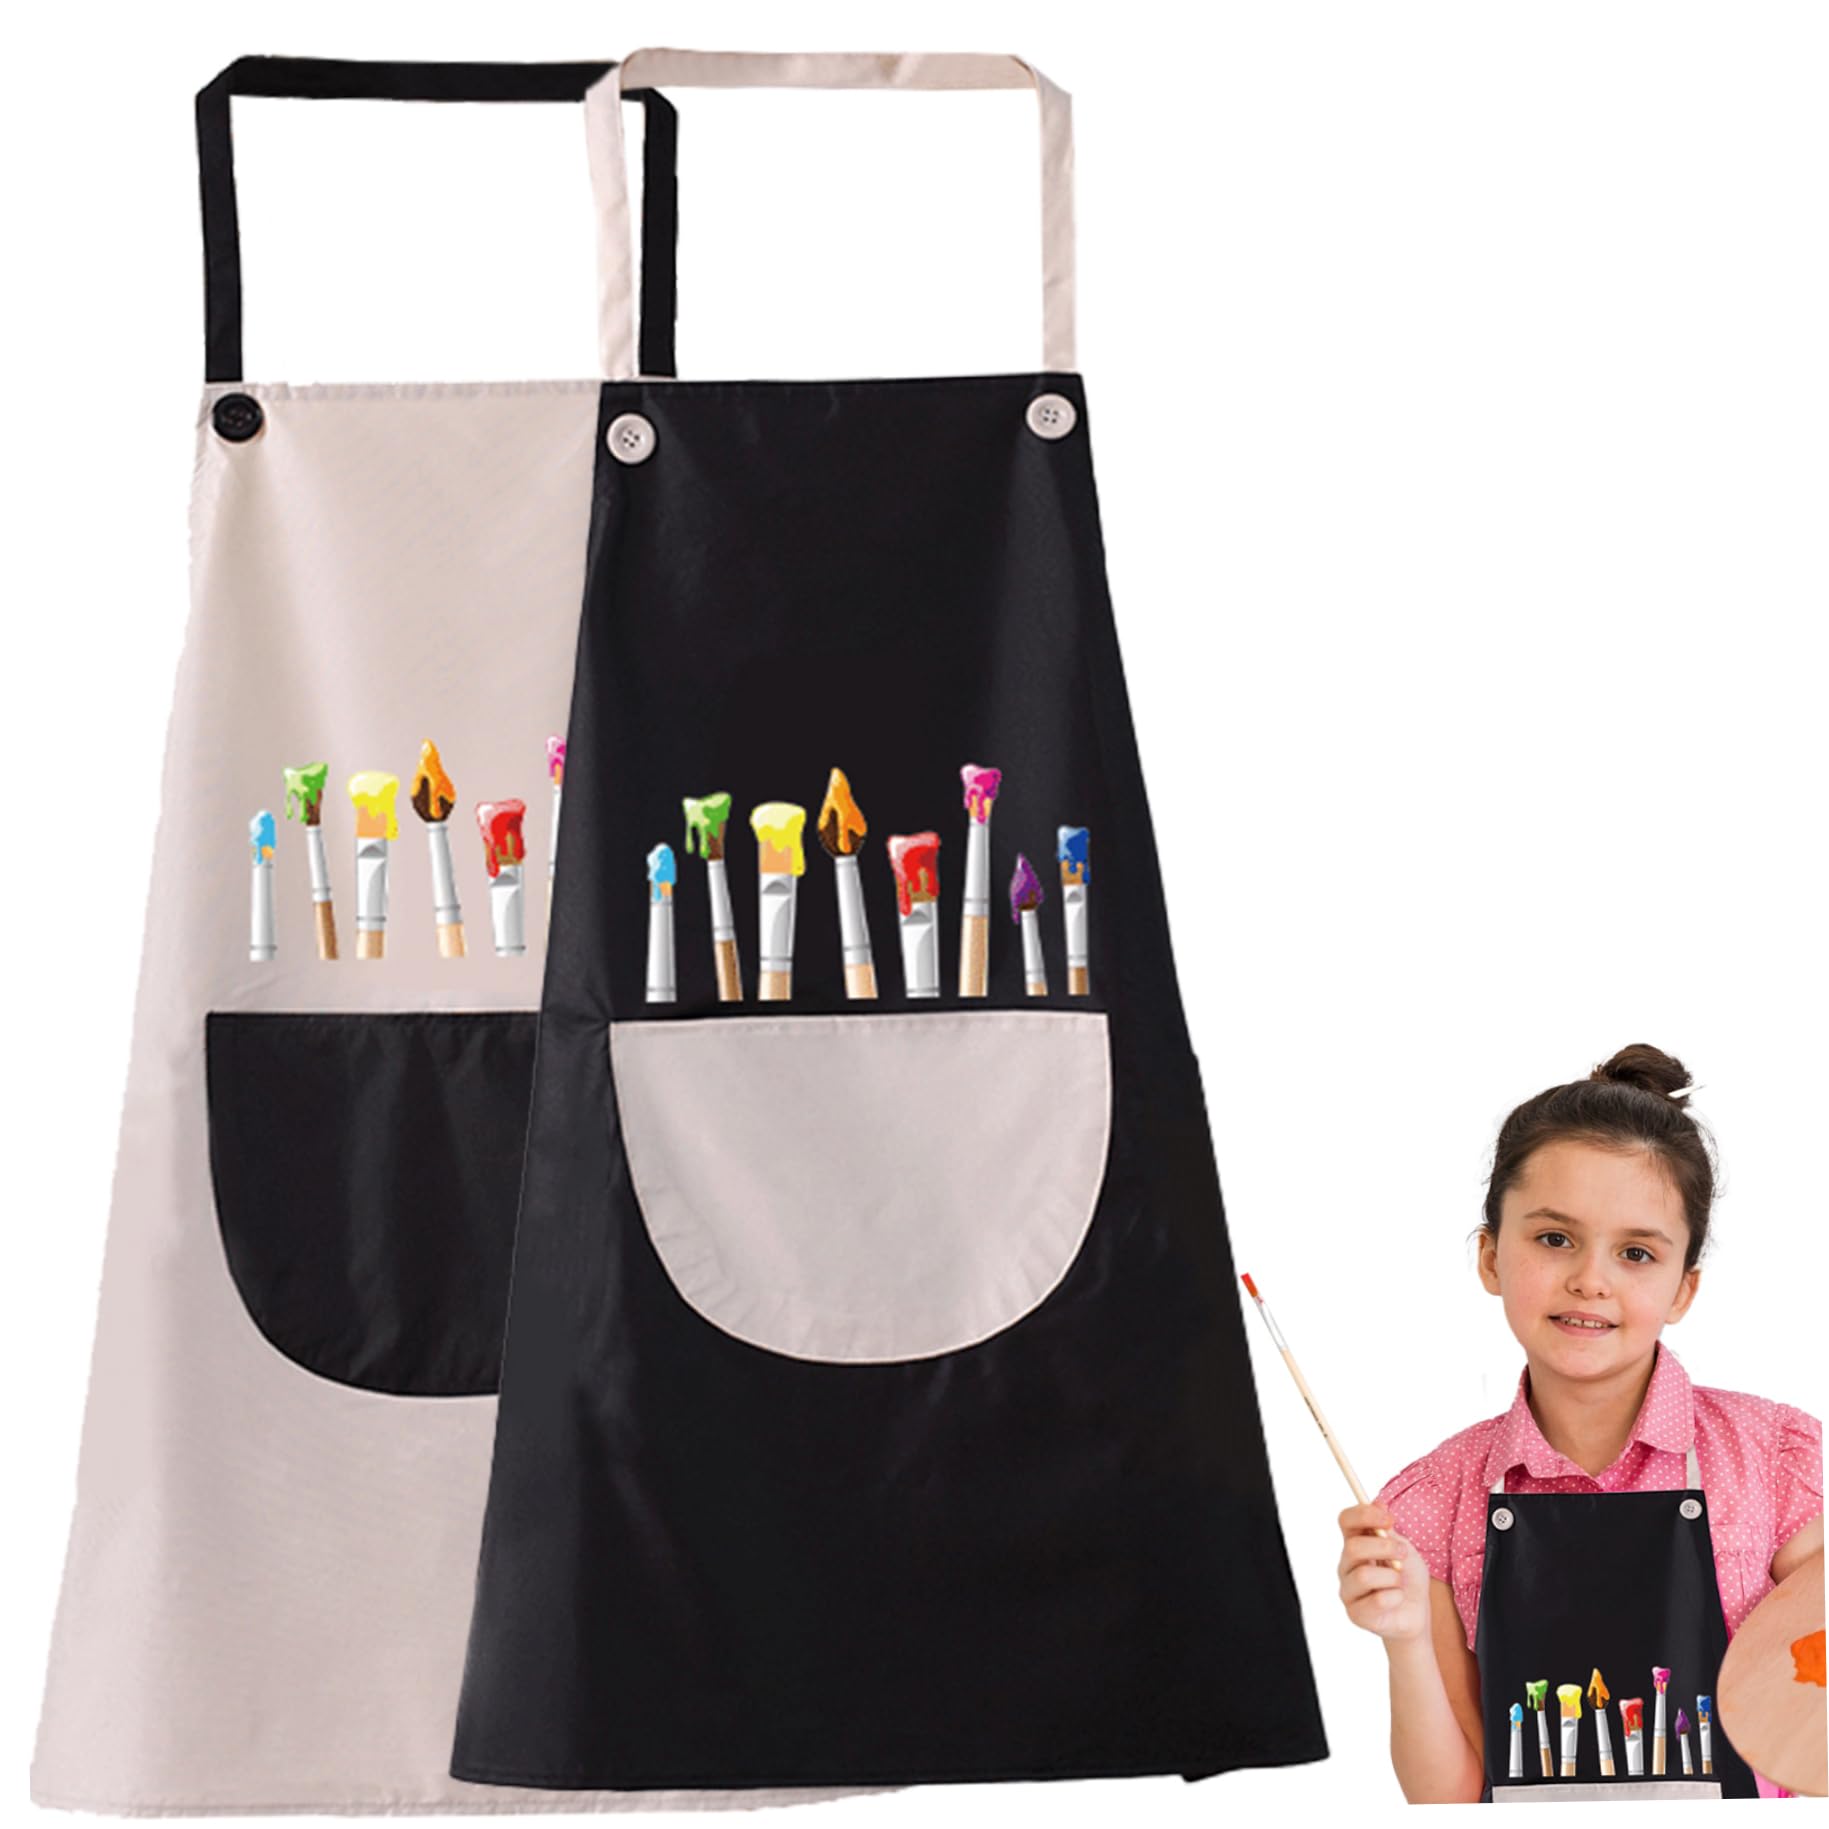 Havamoasa 2Pcs Kids Painting Aprons Kids Apron Waterproof ＆ Oilproof Toddler Art Smock with Roomy Pocket Adjustable Children Play Apron for 9-13 Years Kids Craft, Water Play, Eating